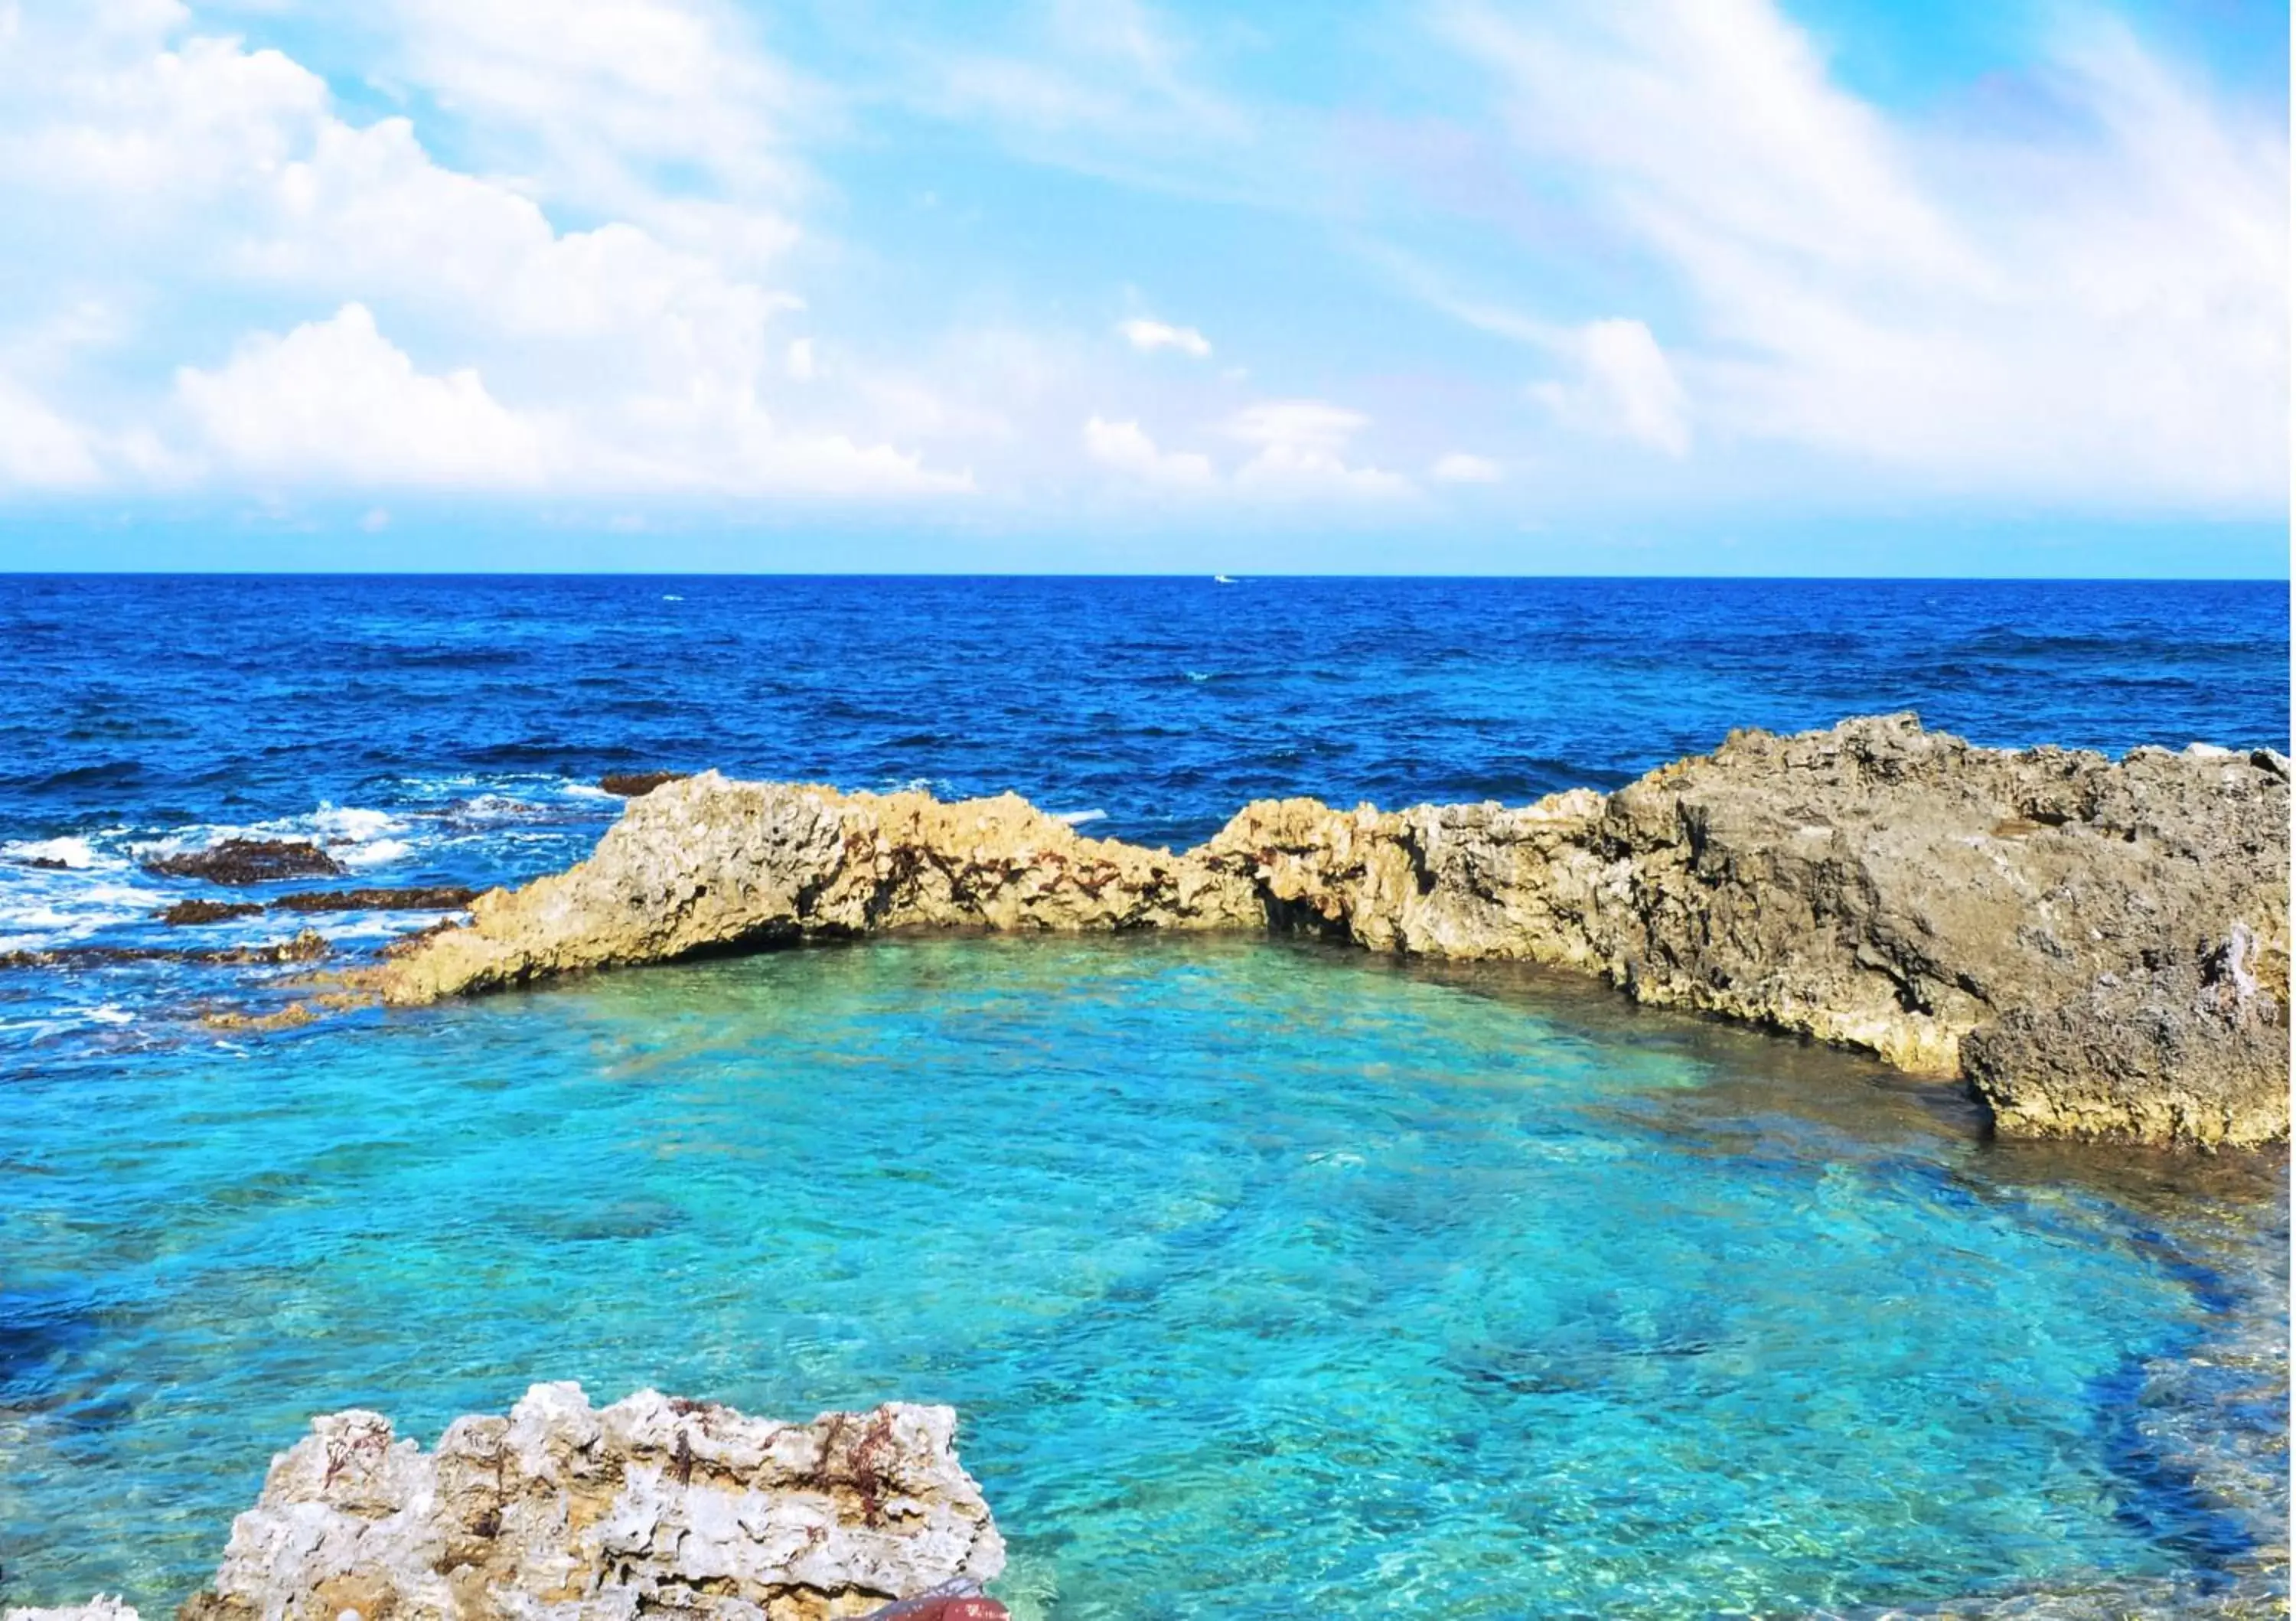 Day, Natural Landscape in Mia Reef Isla Mujeres Cancun All Inclusive Resort